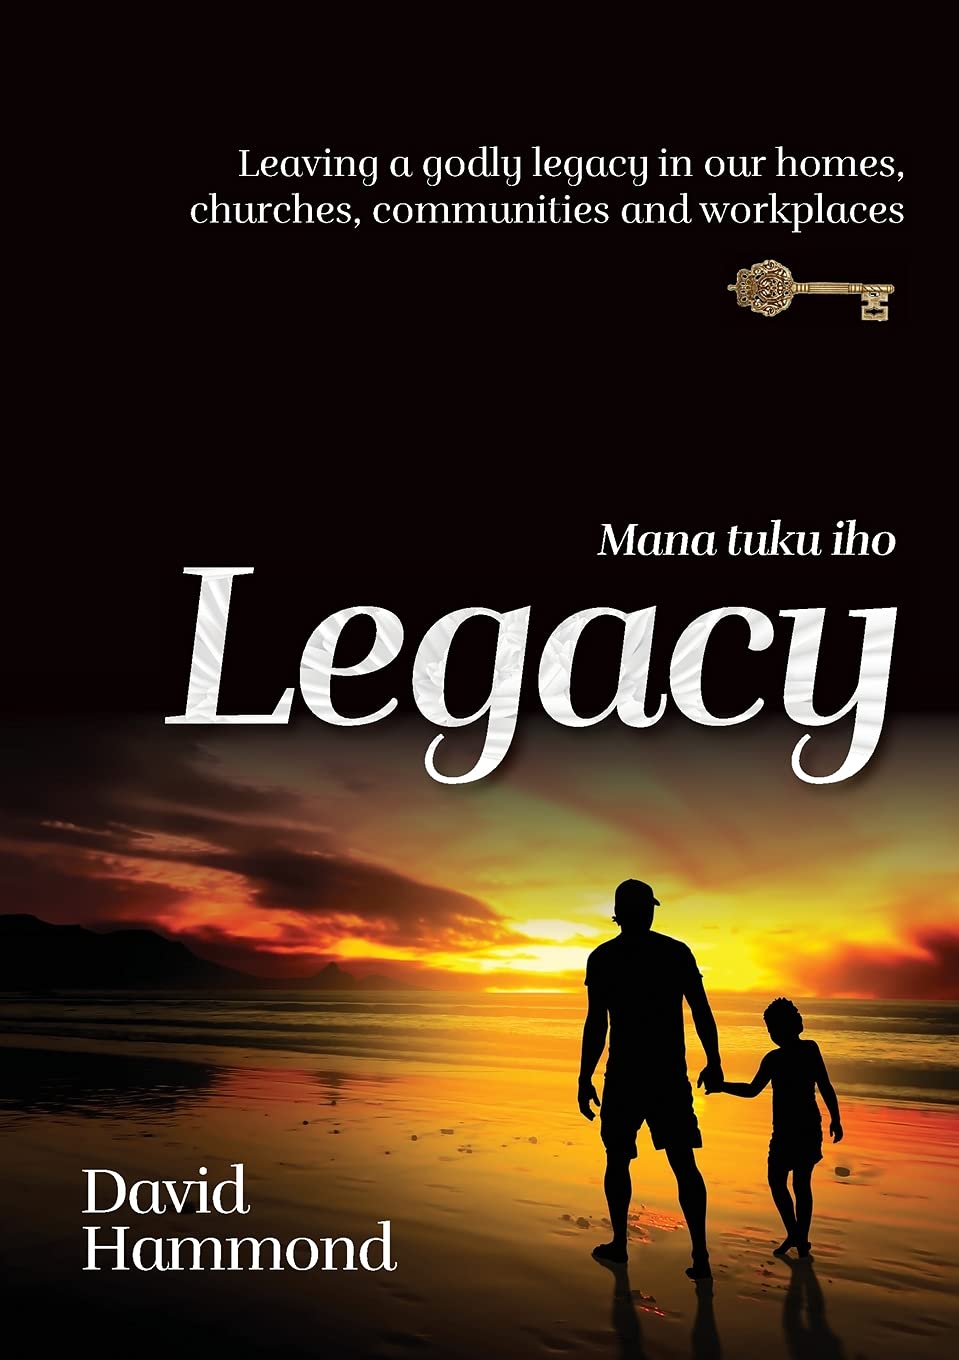 Legacy (Mana Tuku Iho): Leaving A Godly Legacy In Our Homes, Churches, Communities and Workplaces